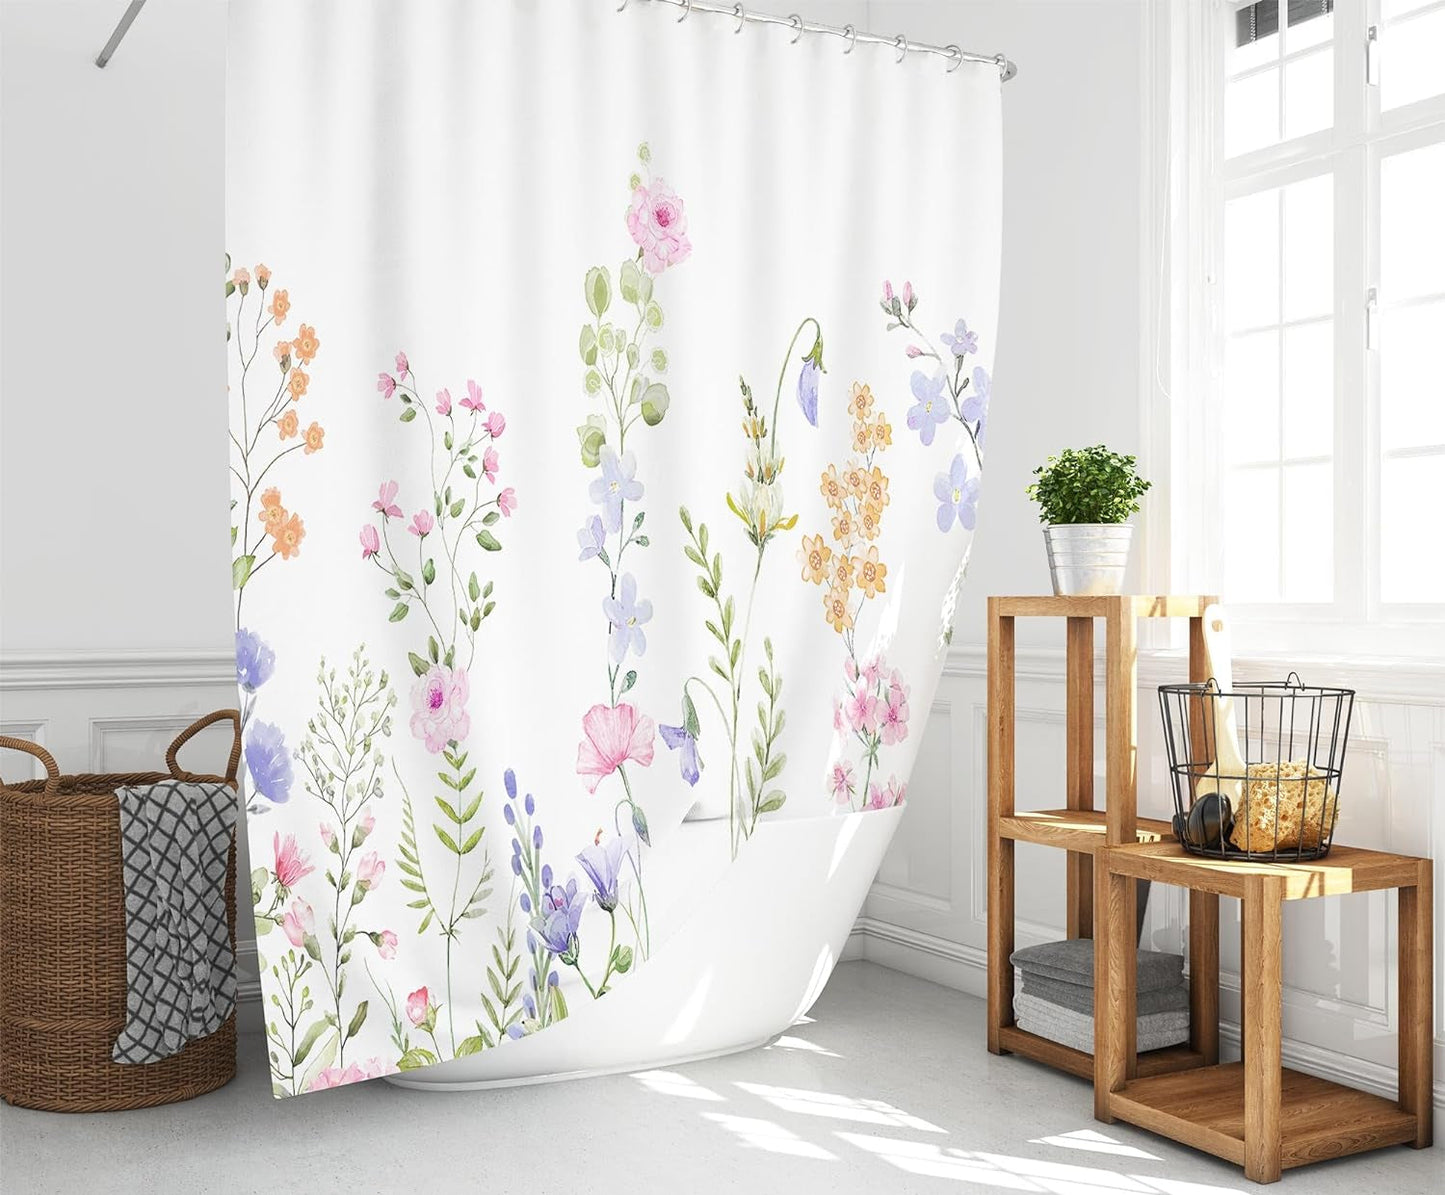 Allenjoy 72"X72" Watercolor Abstract Floral Lightweight PEVA Waterproof Shower Curtain with 12 Plastic Hooks